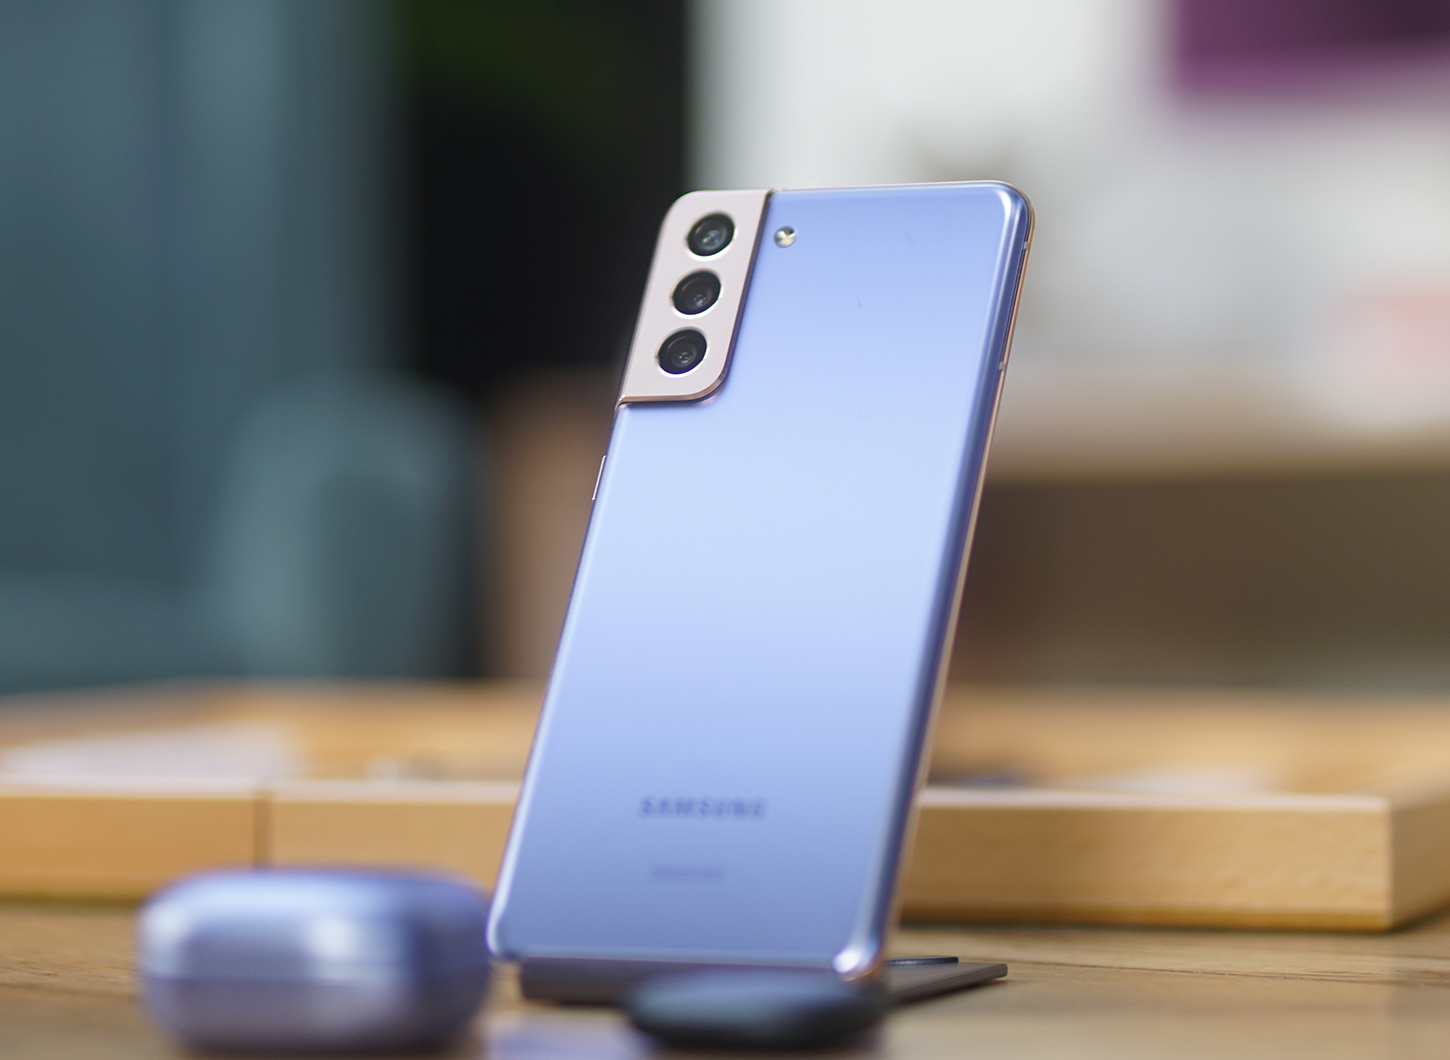 Samsung Galaxy S20 is getting powerful S21 camera features — Here’s what to expect